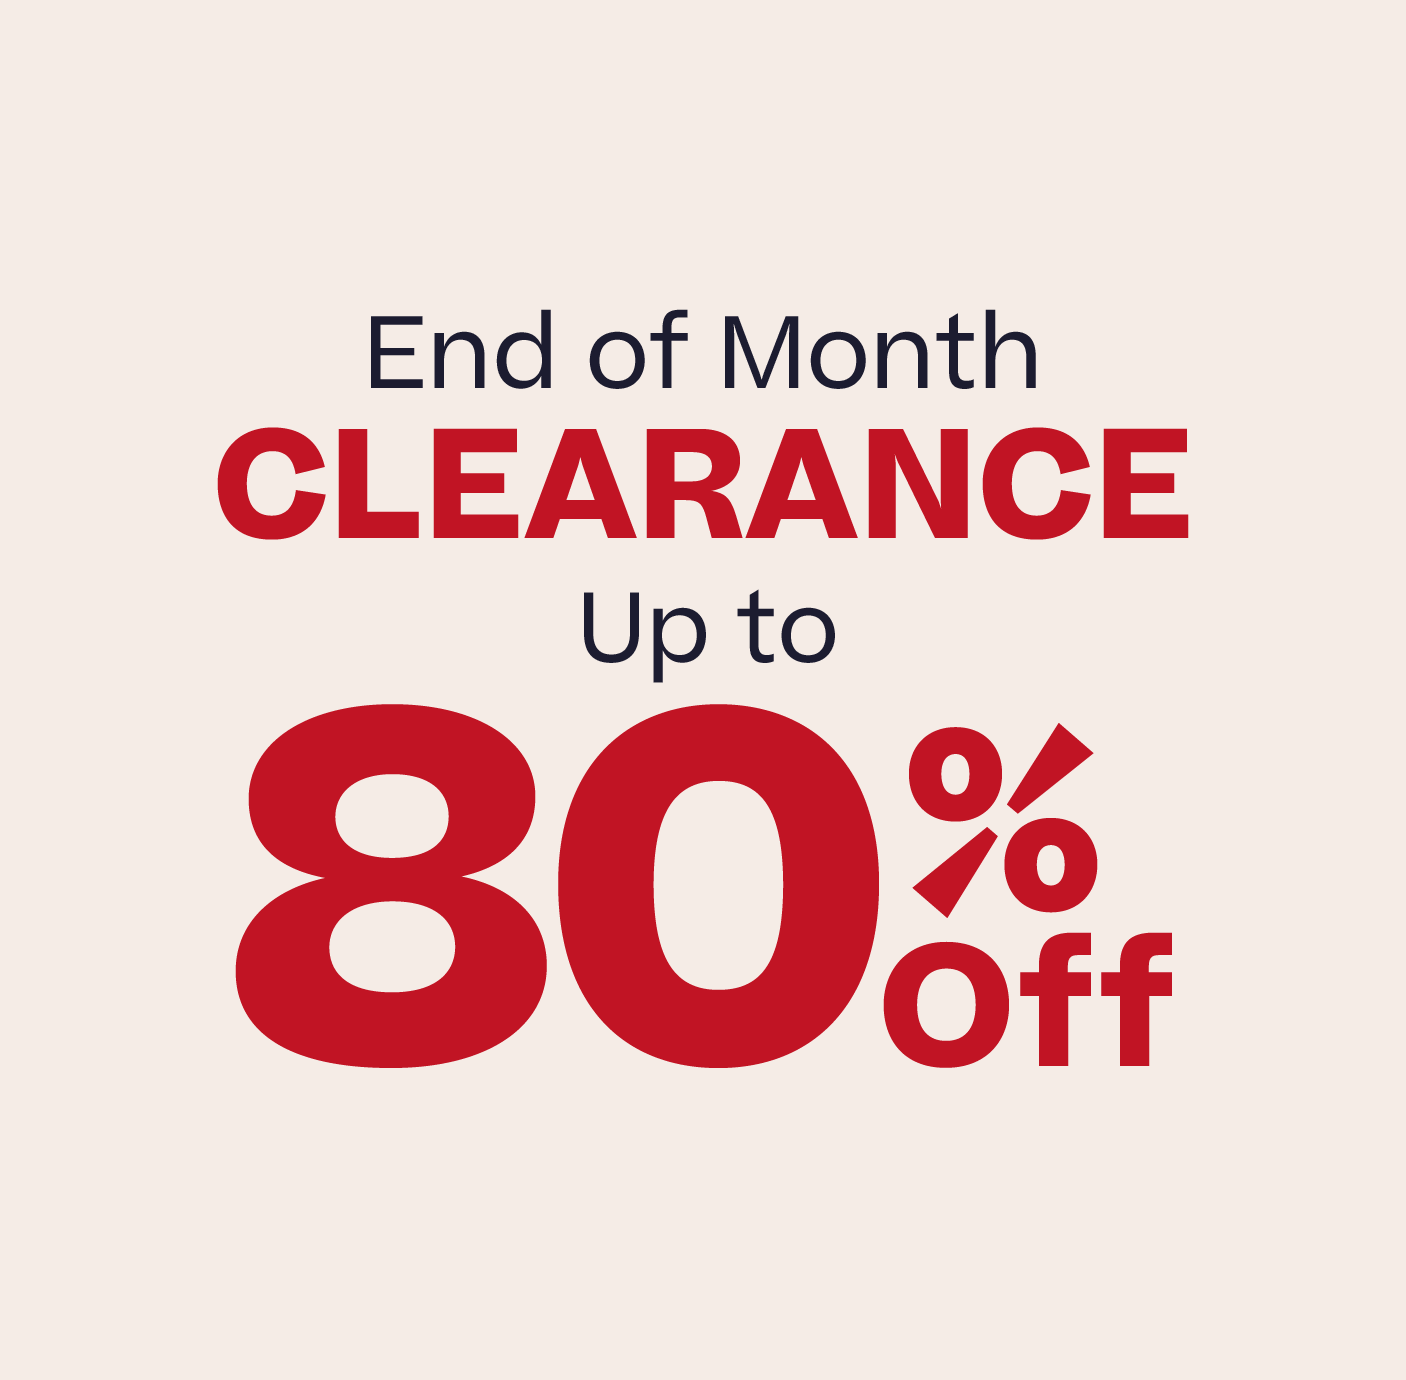 End of Month Clearance Up to 80% Off